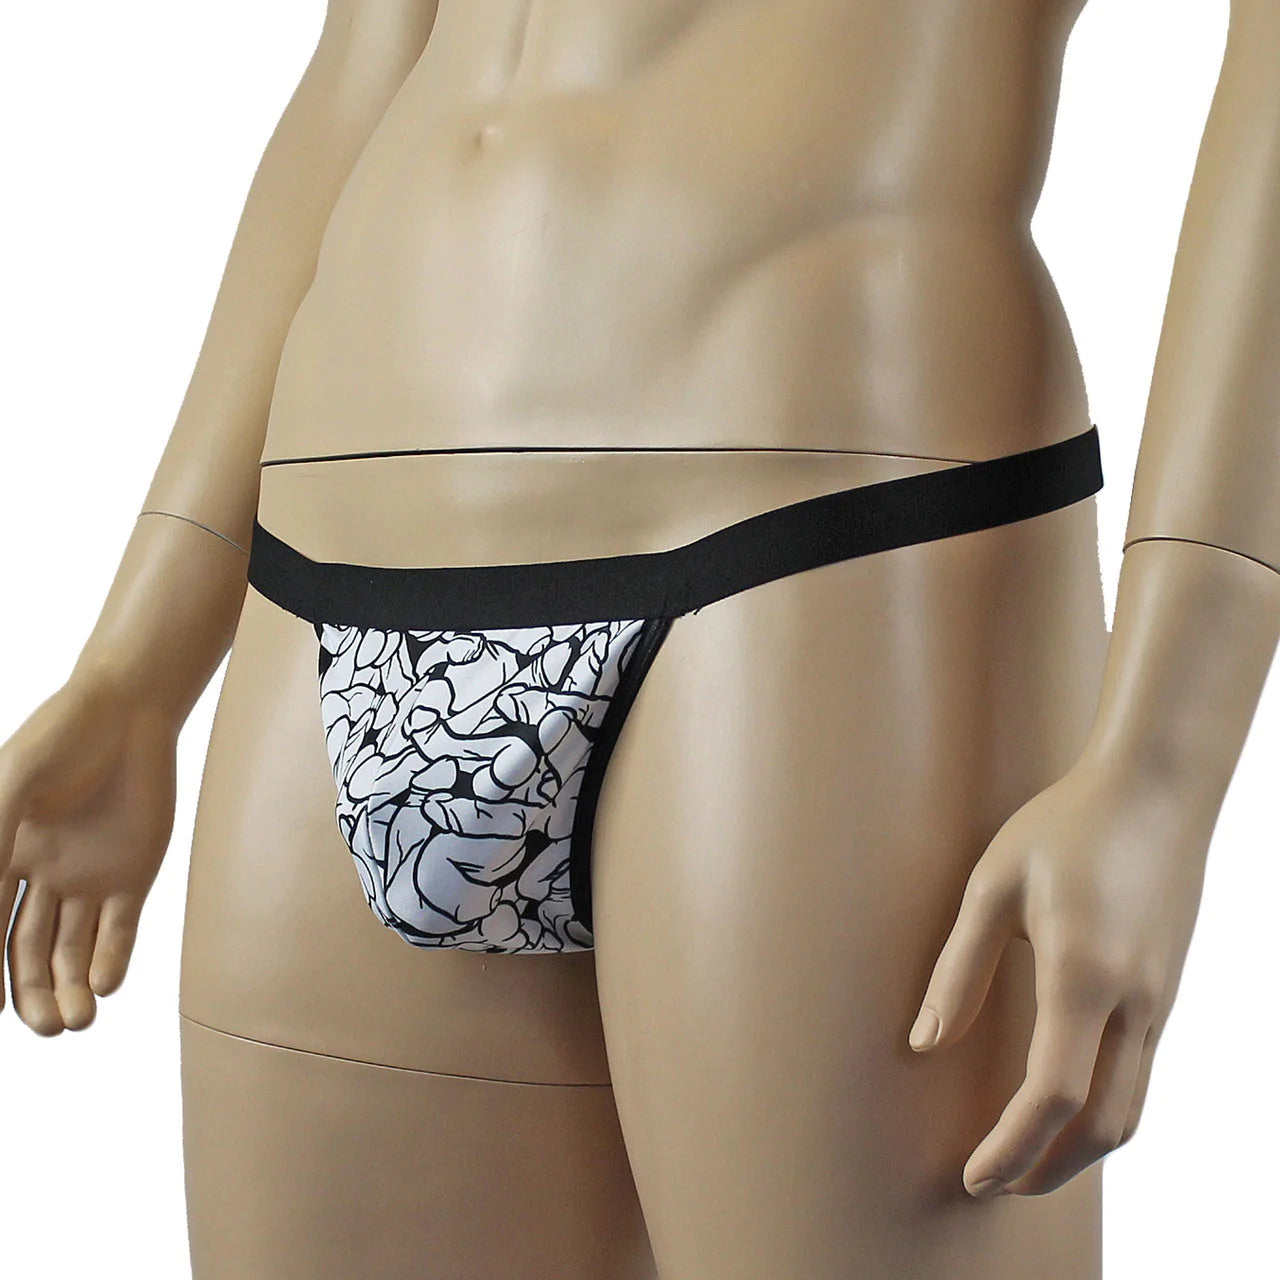 SALE - Male Willie G string Thong with Naughty Print Black and White